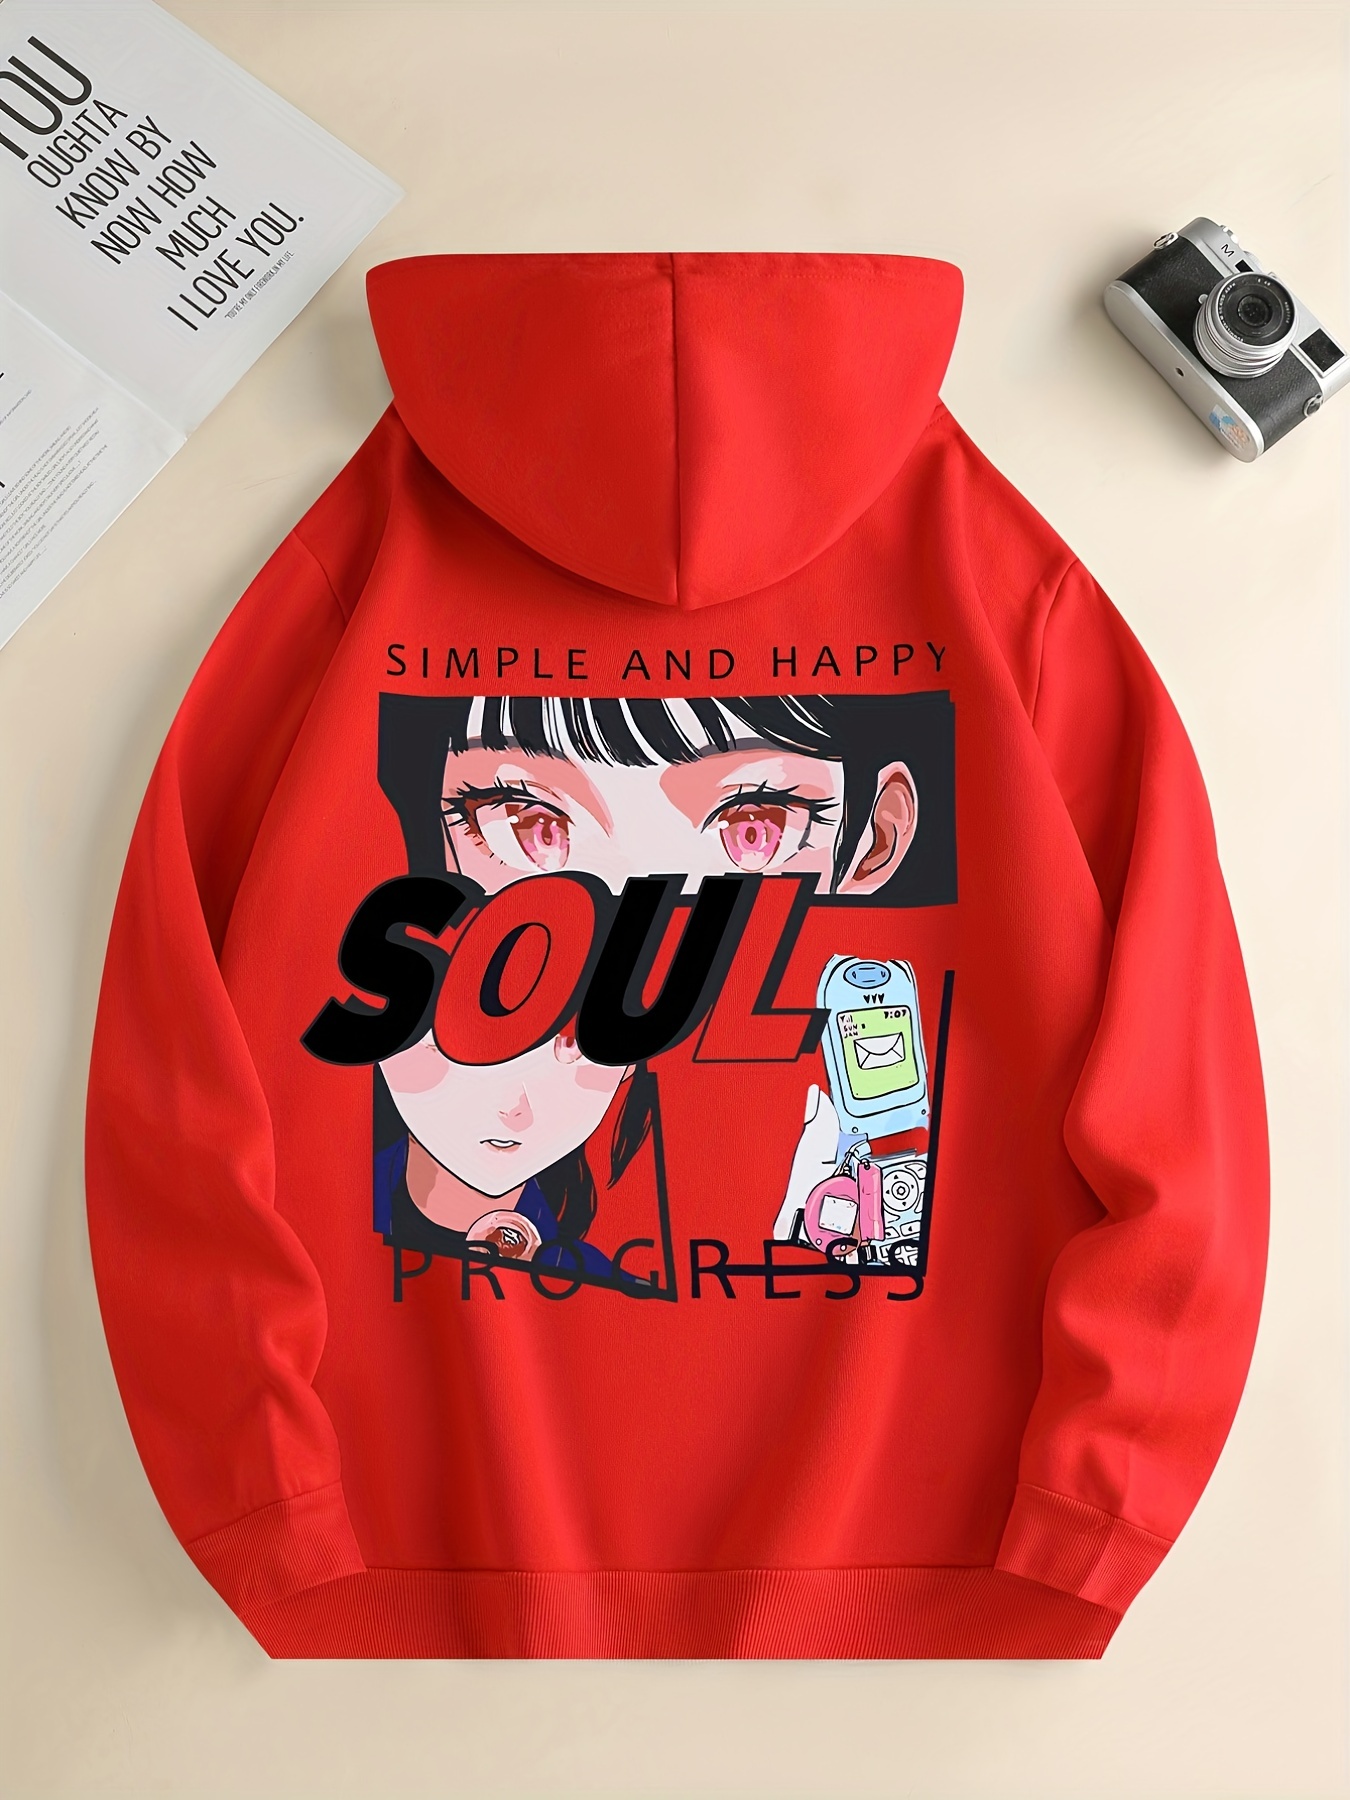 Couple Cat Print Hoodie Aesthetic Clothes Oversized Anime Hoodie Simple  Spring Autumn Sweatsuit Kawaii Hoody Girl Fashion Tops - AliExpress